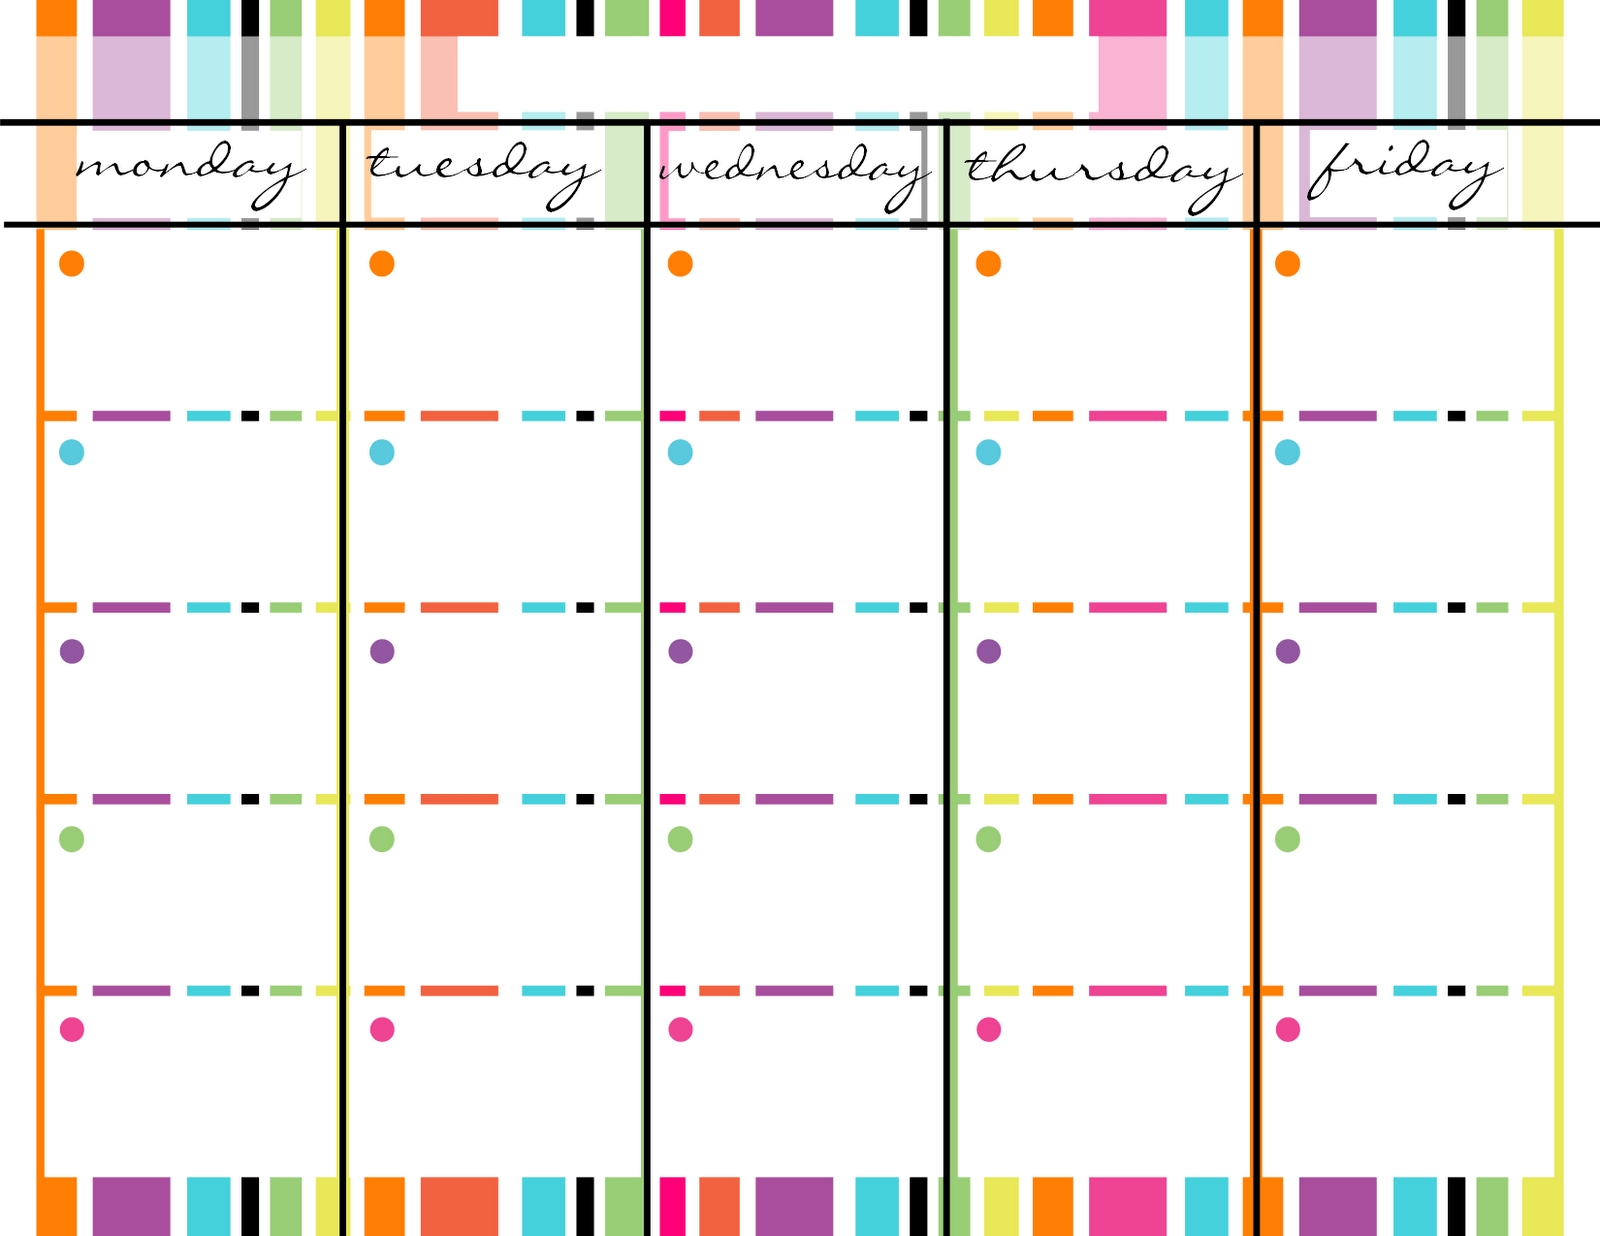 Calendar Template Monday To Friday | Online Calendar Maker With Photos pertaining to Monday To Friday Timetable Template